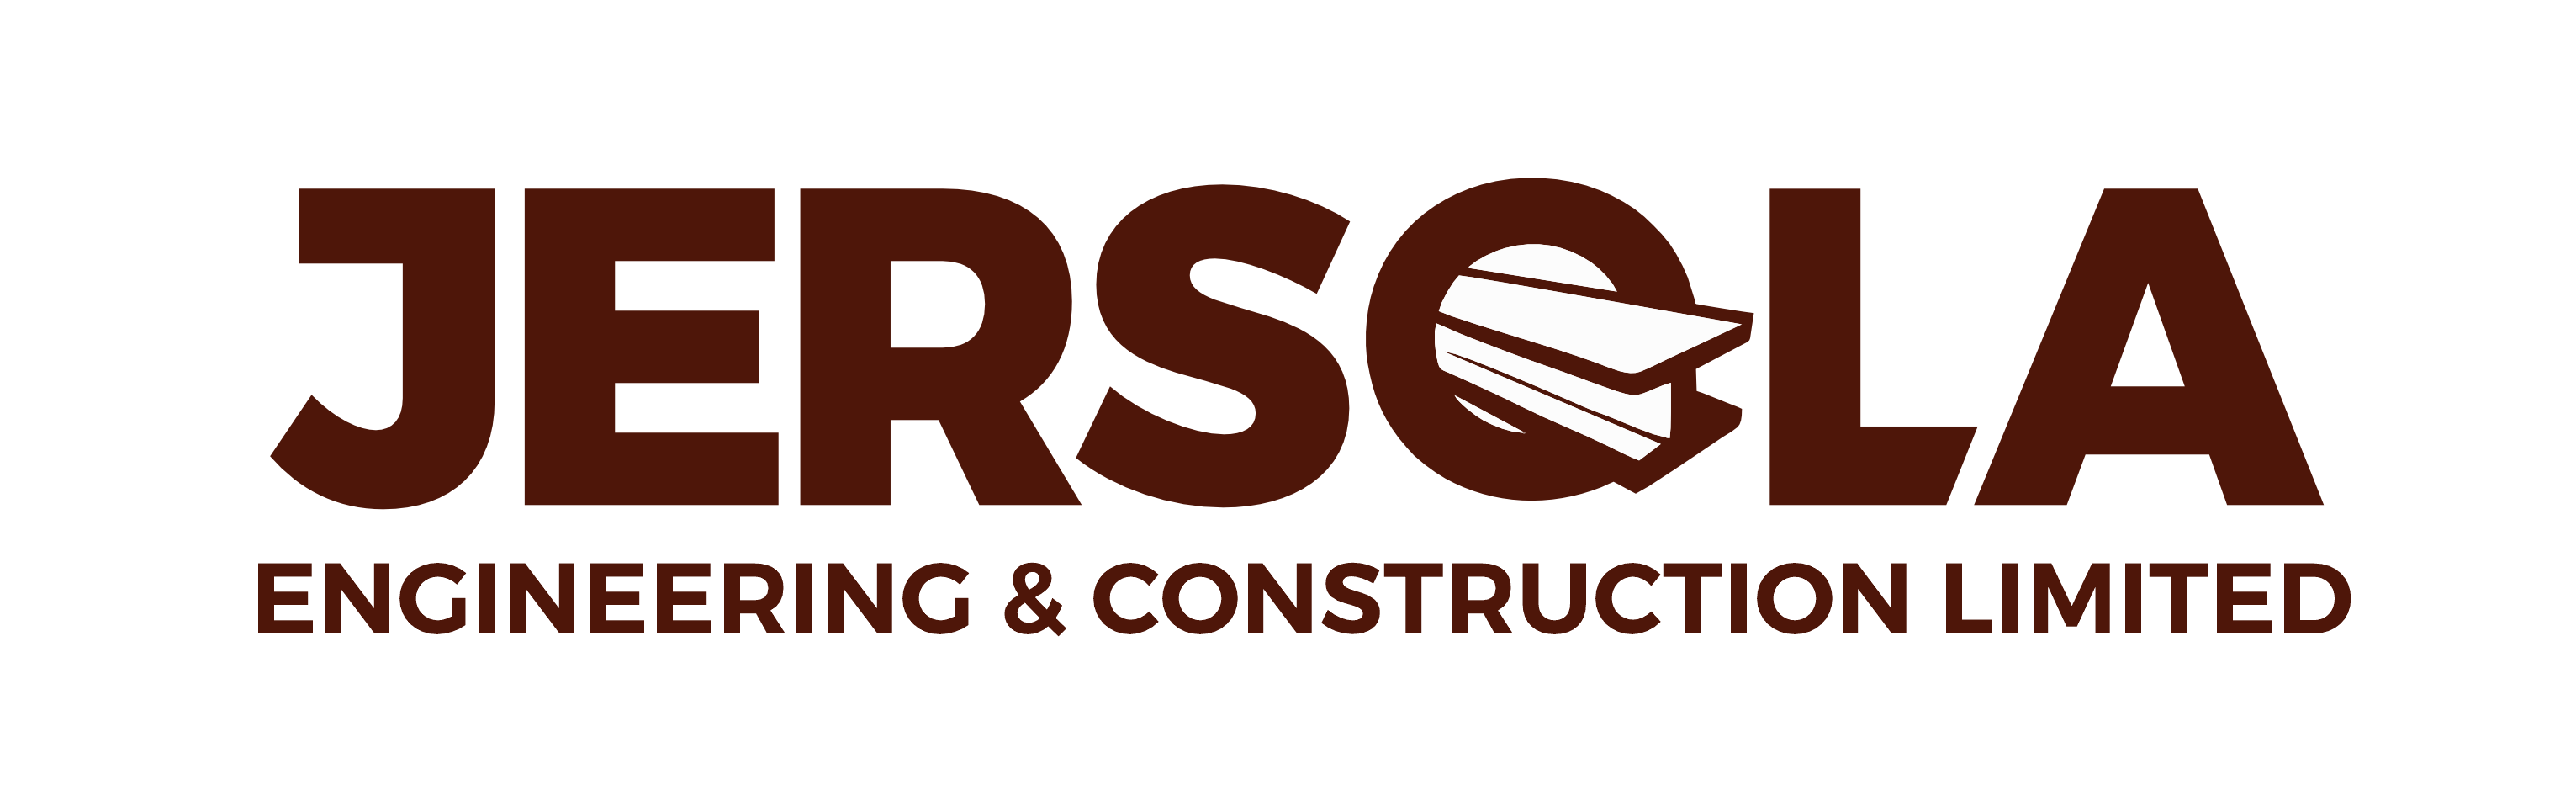 Jersola Engineering & Construction Limited